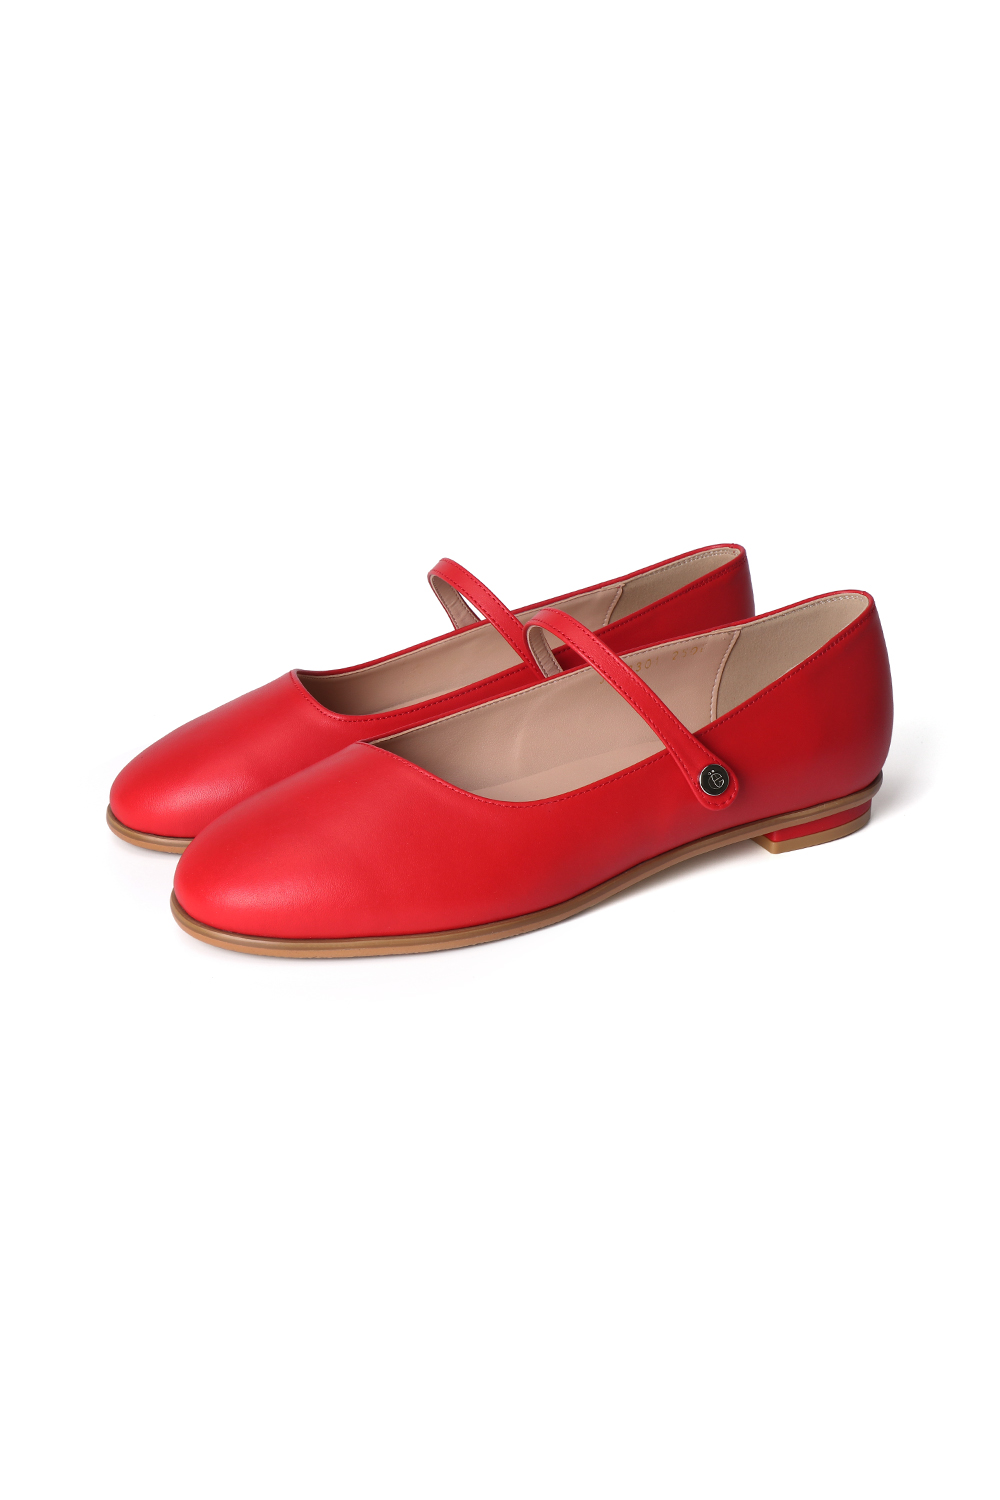 POE MARY JANE SHOES [RED]